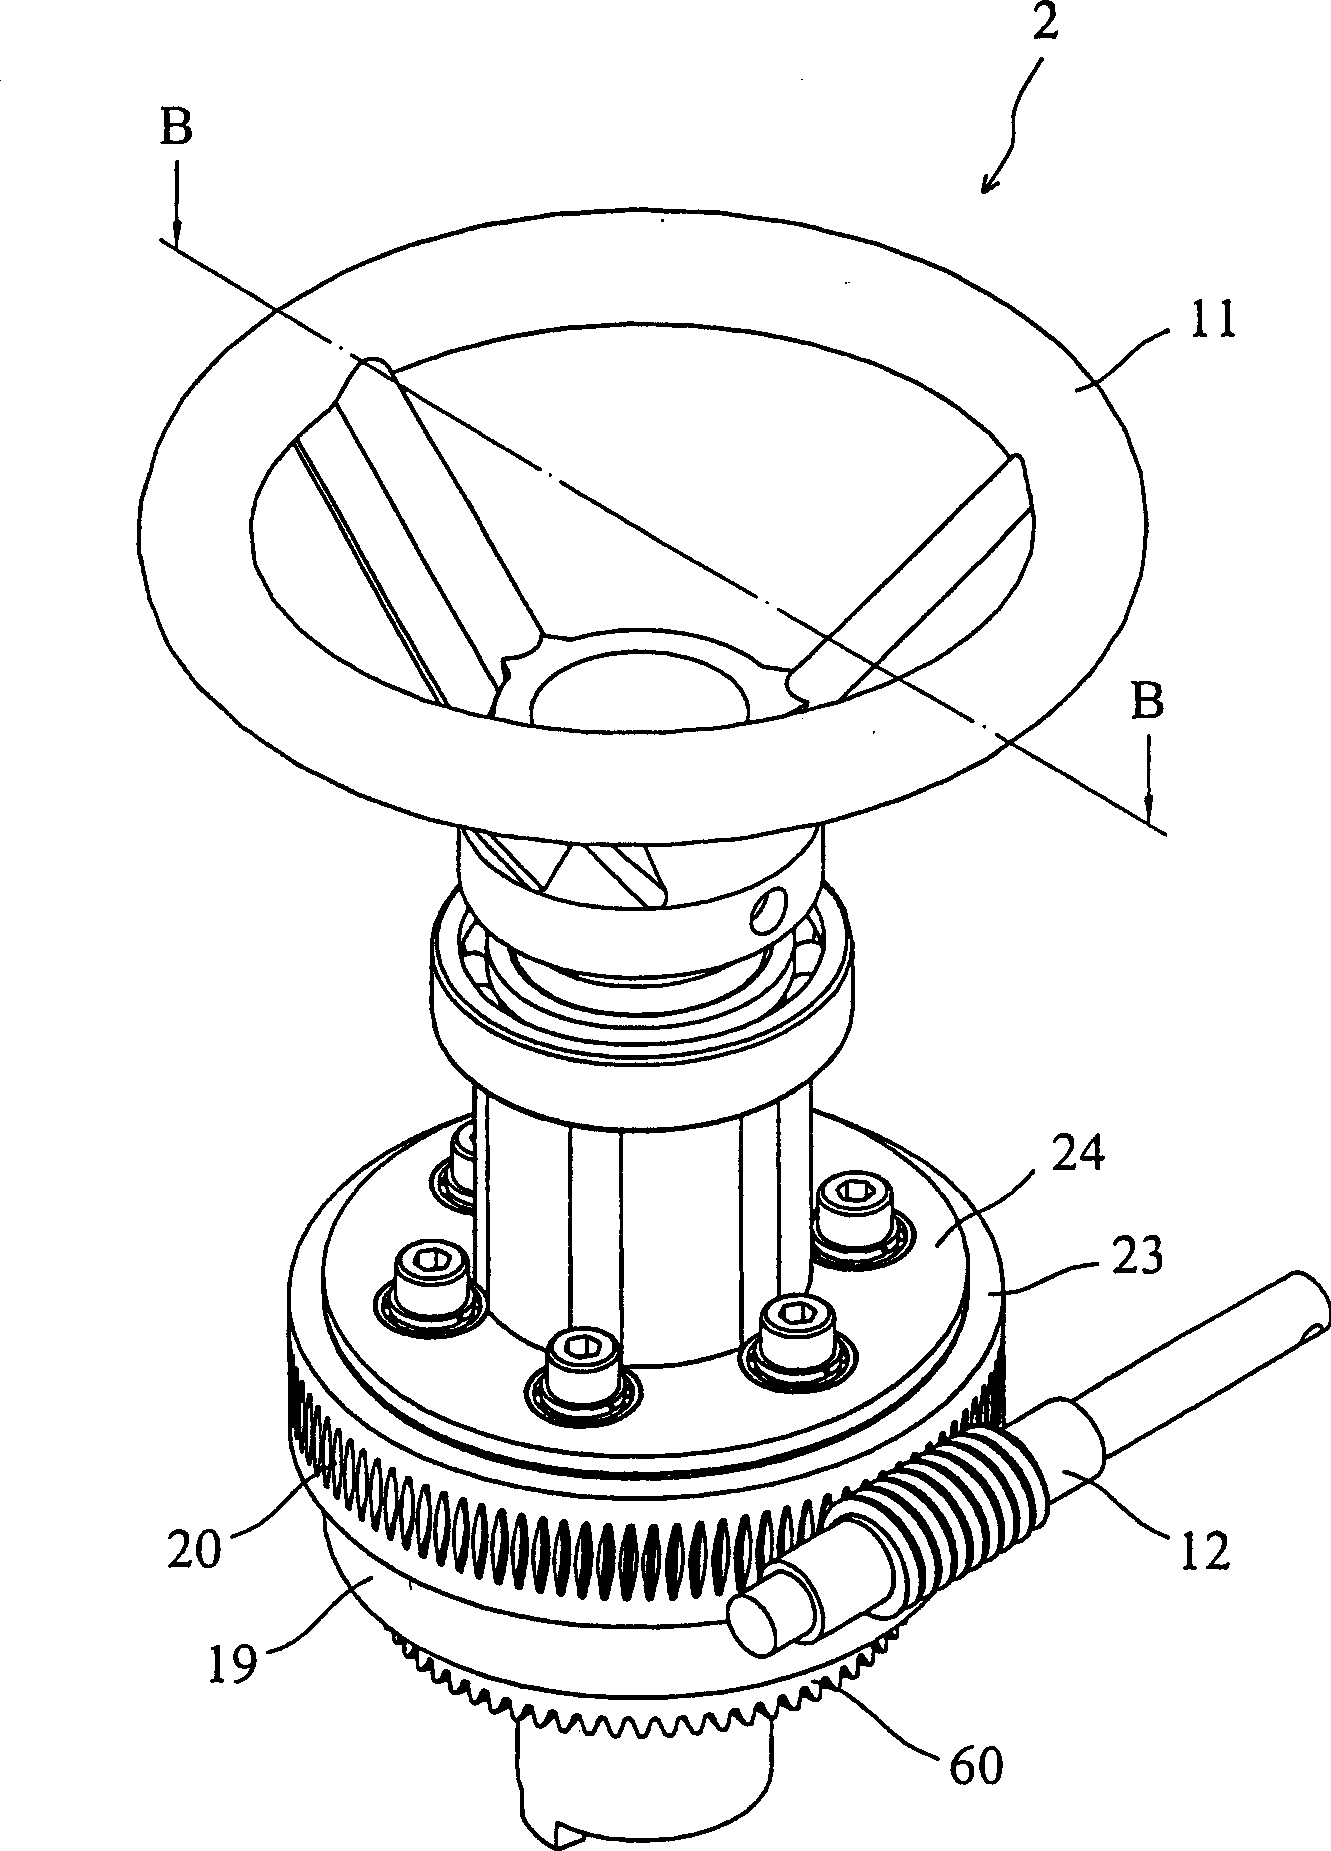 Two-segment differential type planetary gear train driver